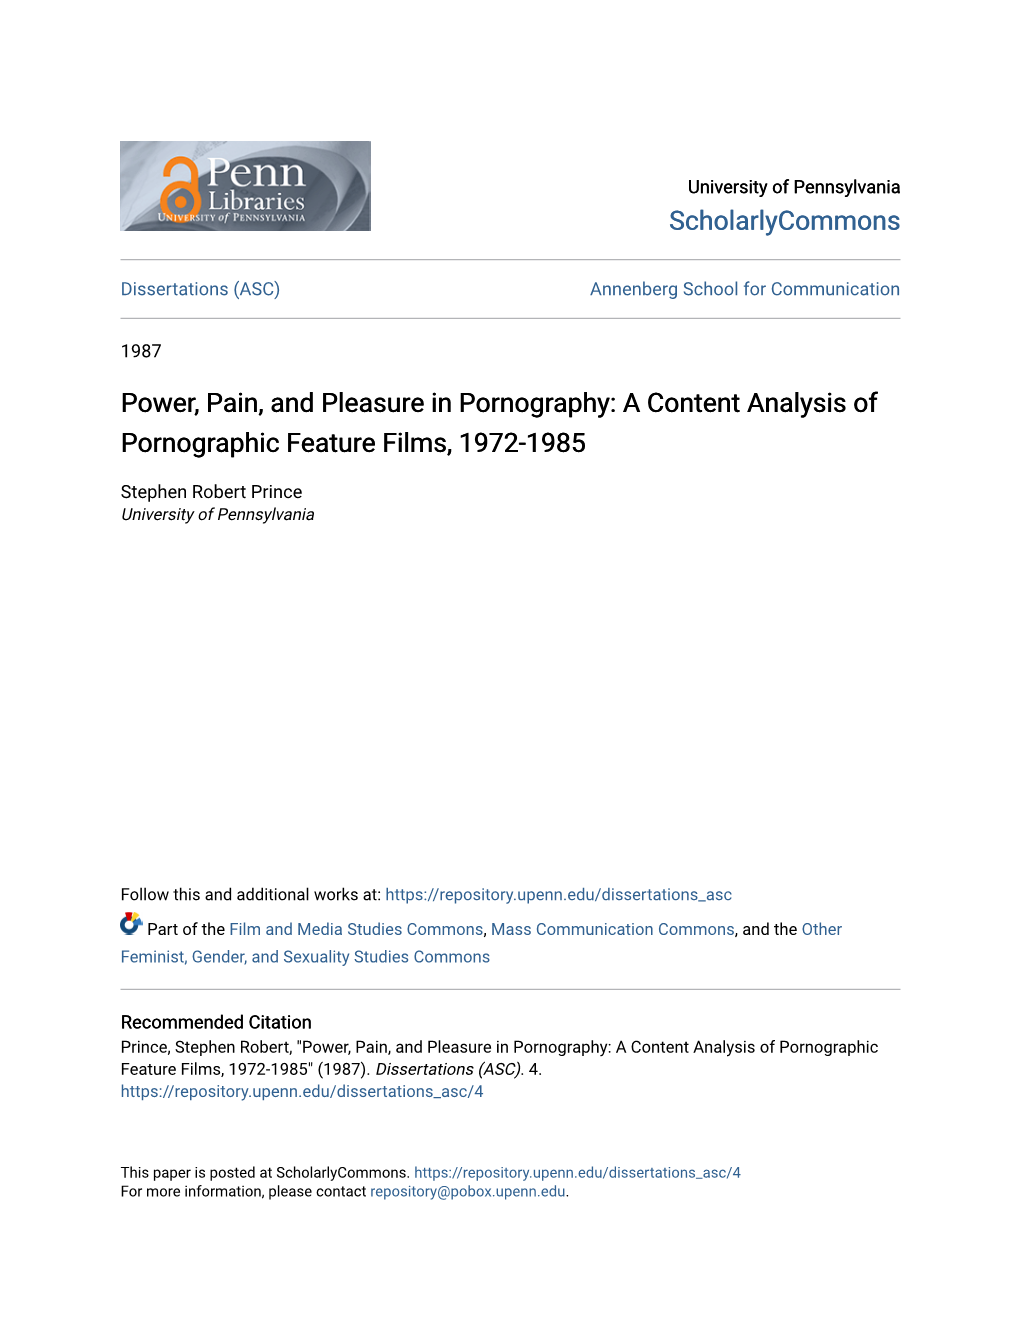 A Content Analysis of Pornographic Feature Films, 1972-1985